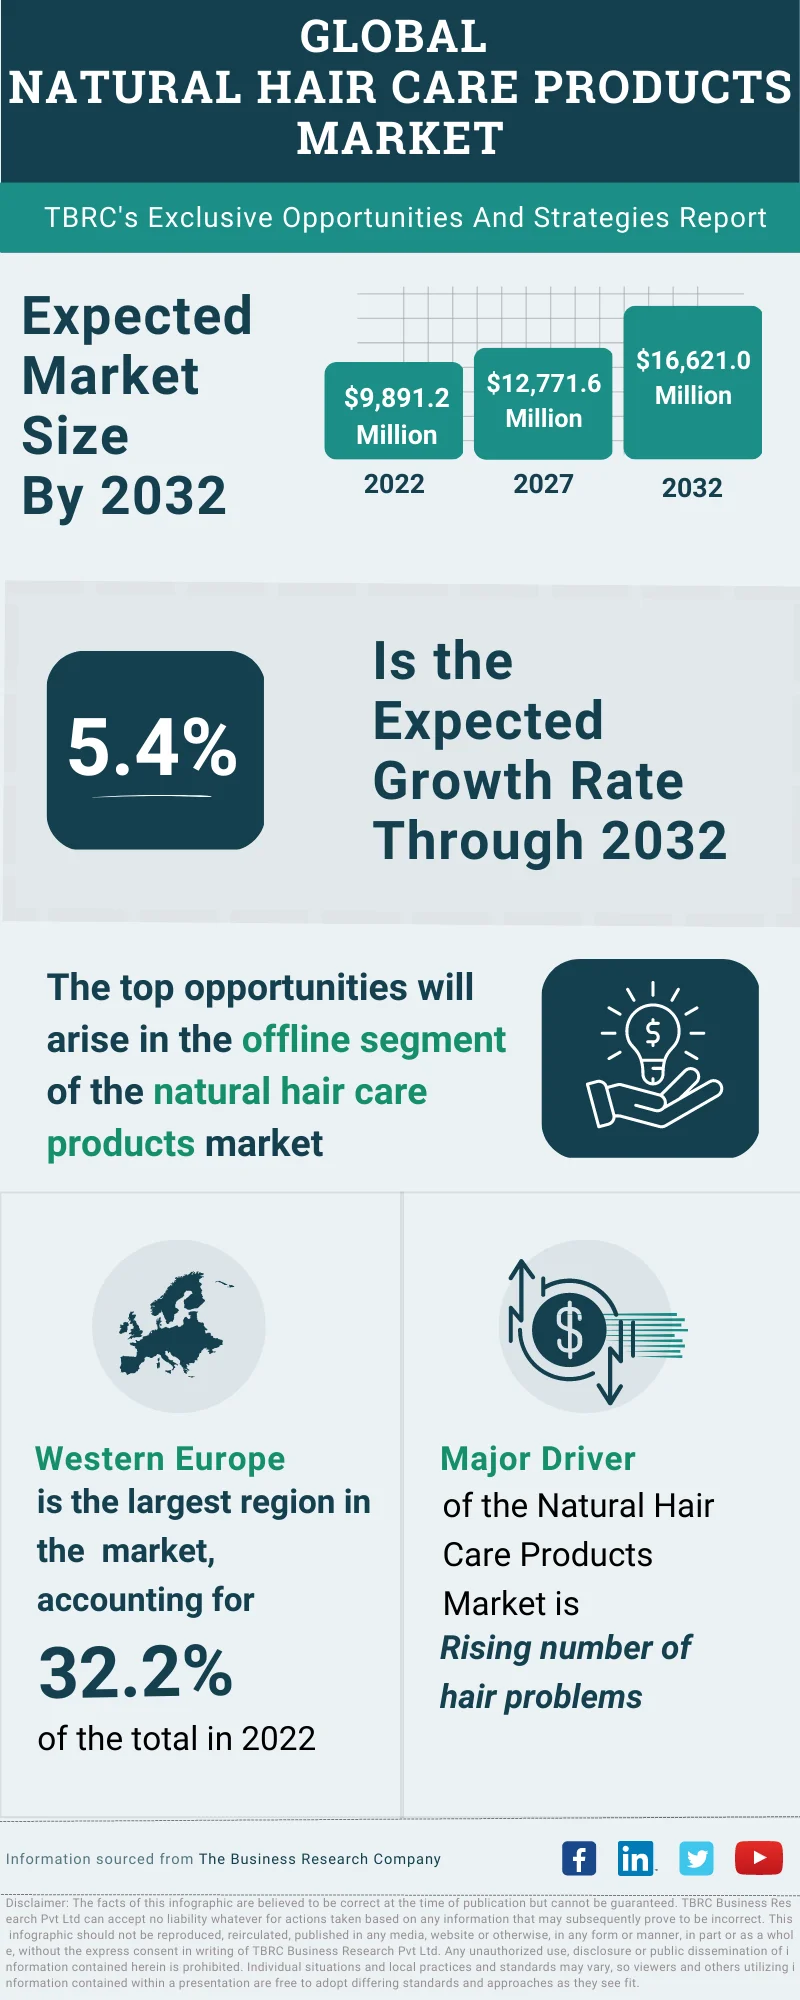 A $177.1 Billion Global Opportunity for Men's Grooming Products by 2026 -  New Research from StrategyR